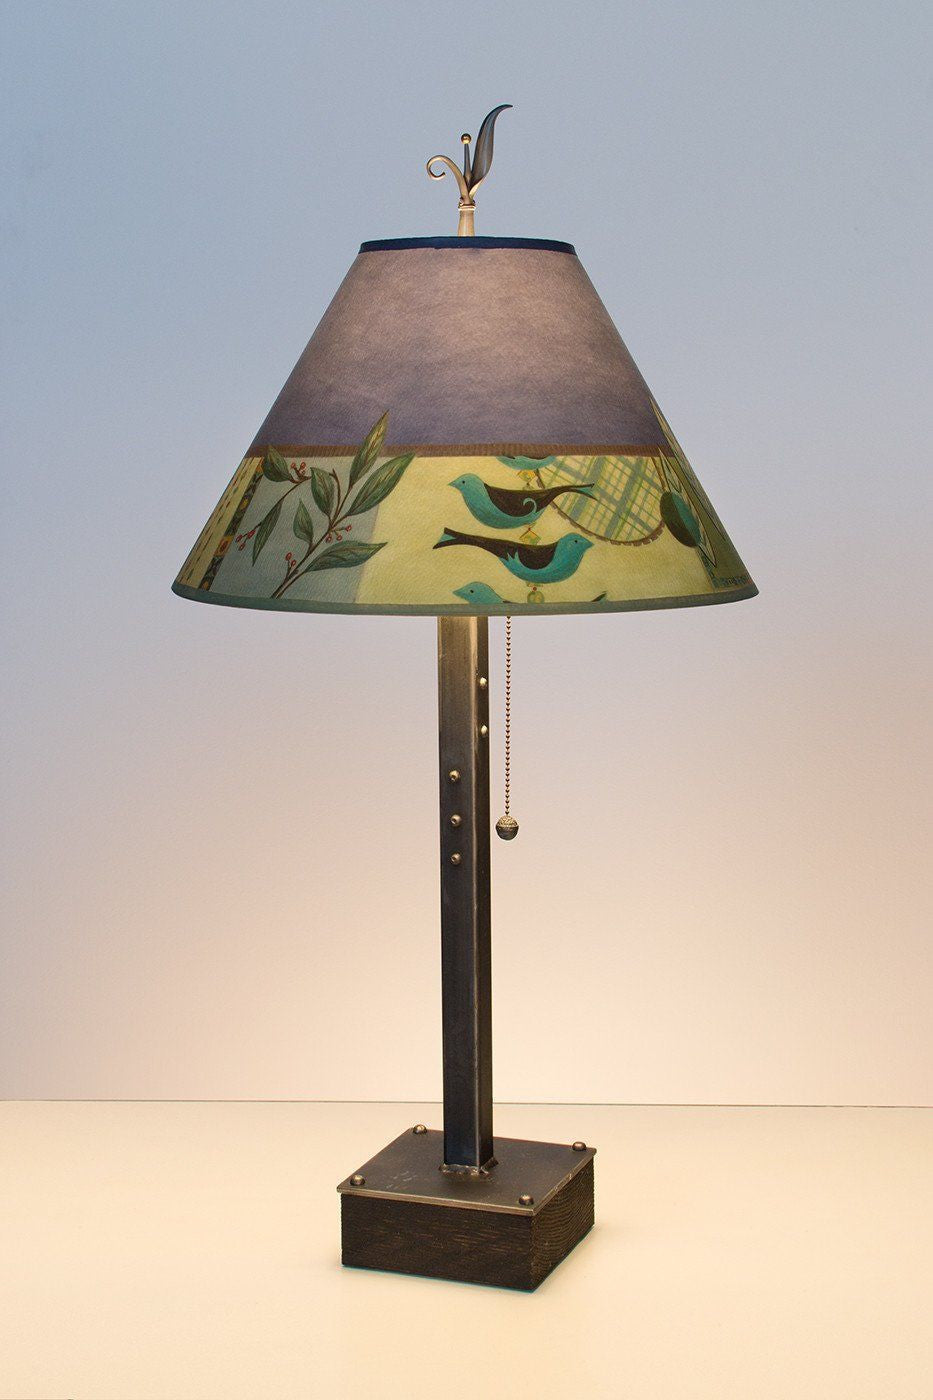 Janna Ugone &amp; Co Table Lamps Steel Table Lamp on Wood with Medium Conical Shade in New Capri Periwinkle